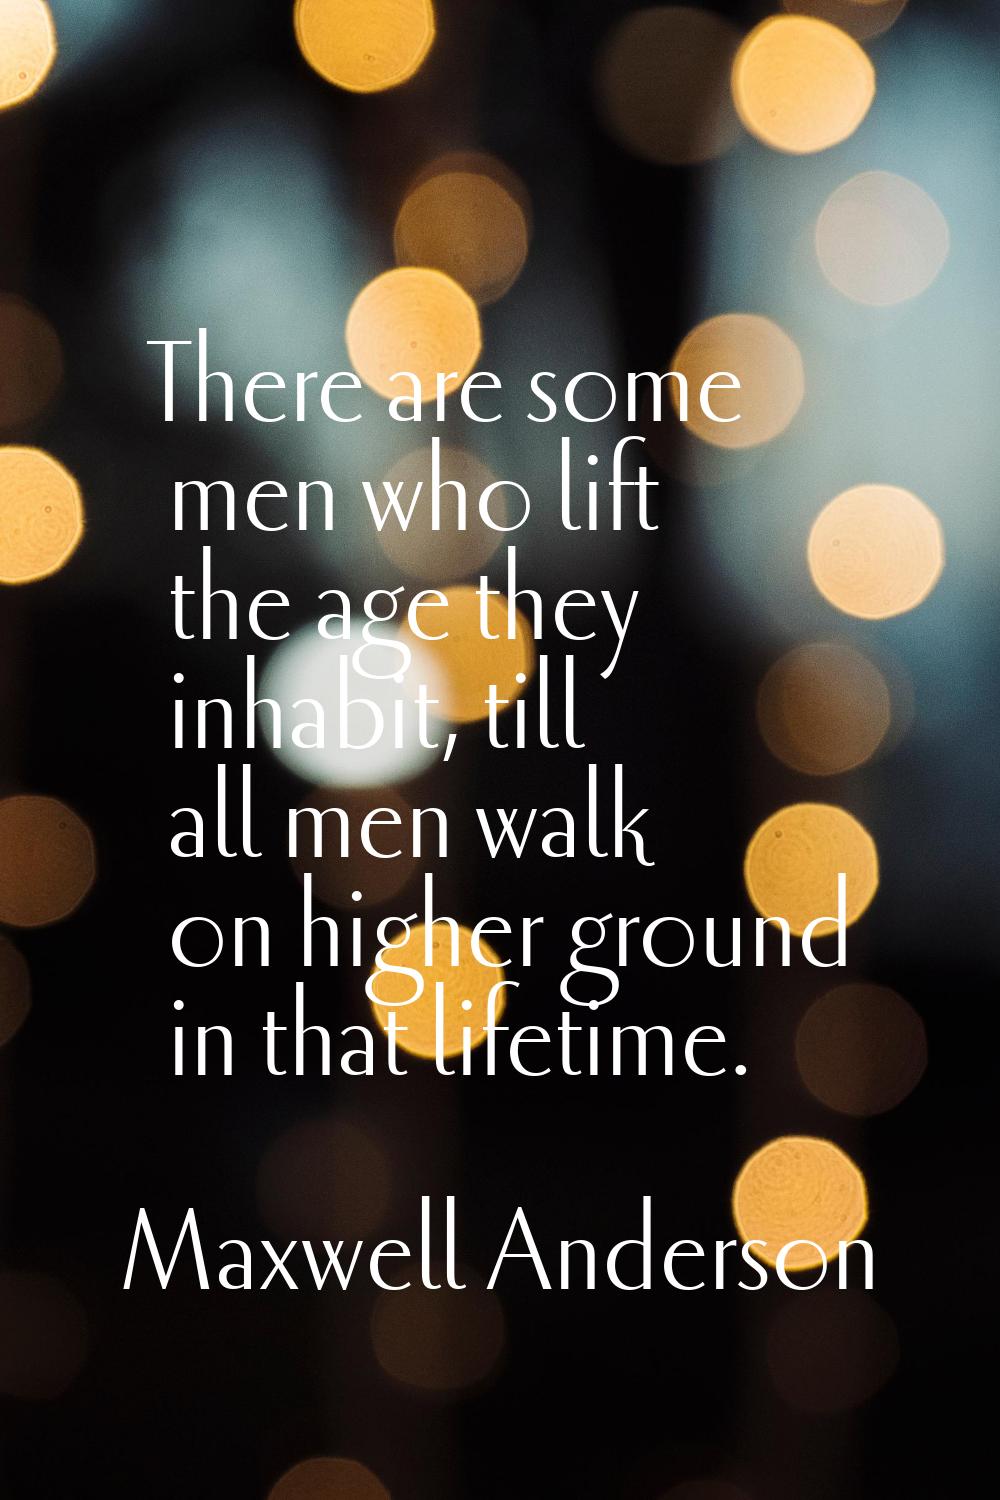 There are some men who lift the age they inhabit, till all men walk on higher ground in that lifeti